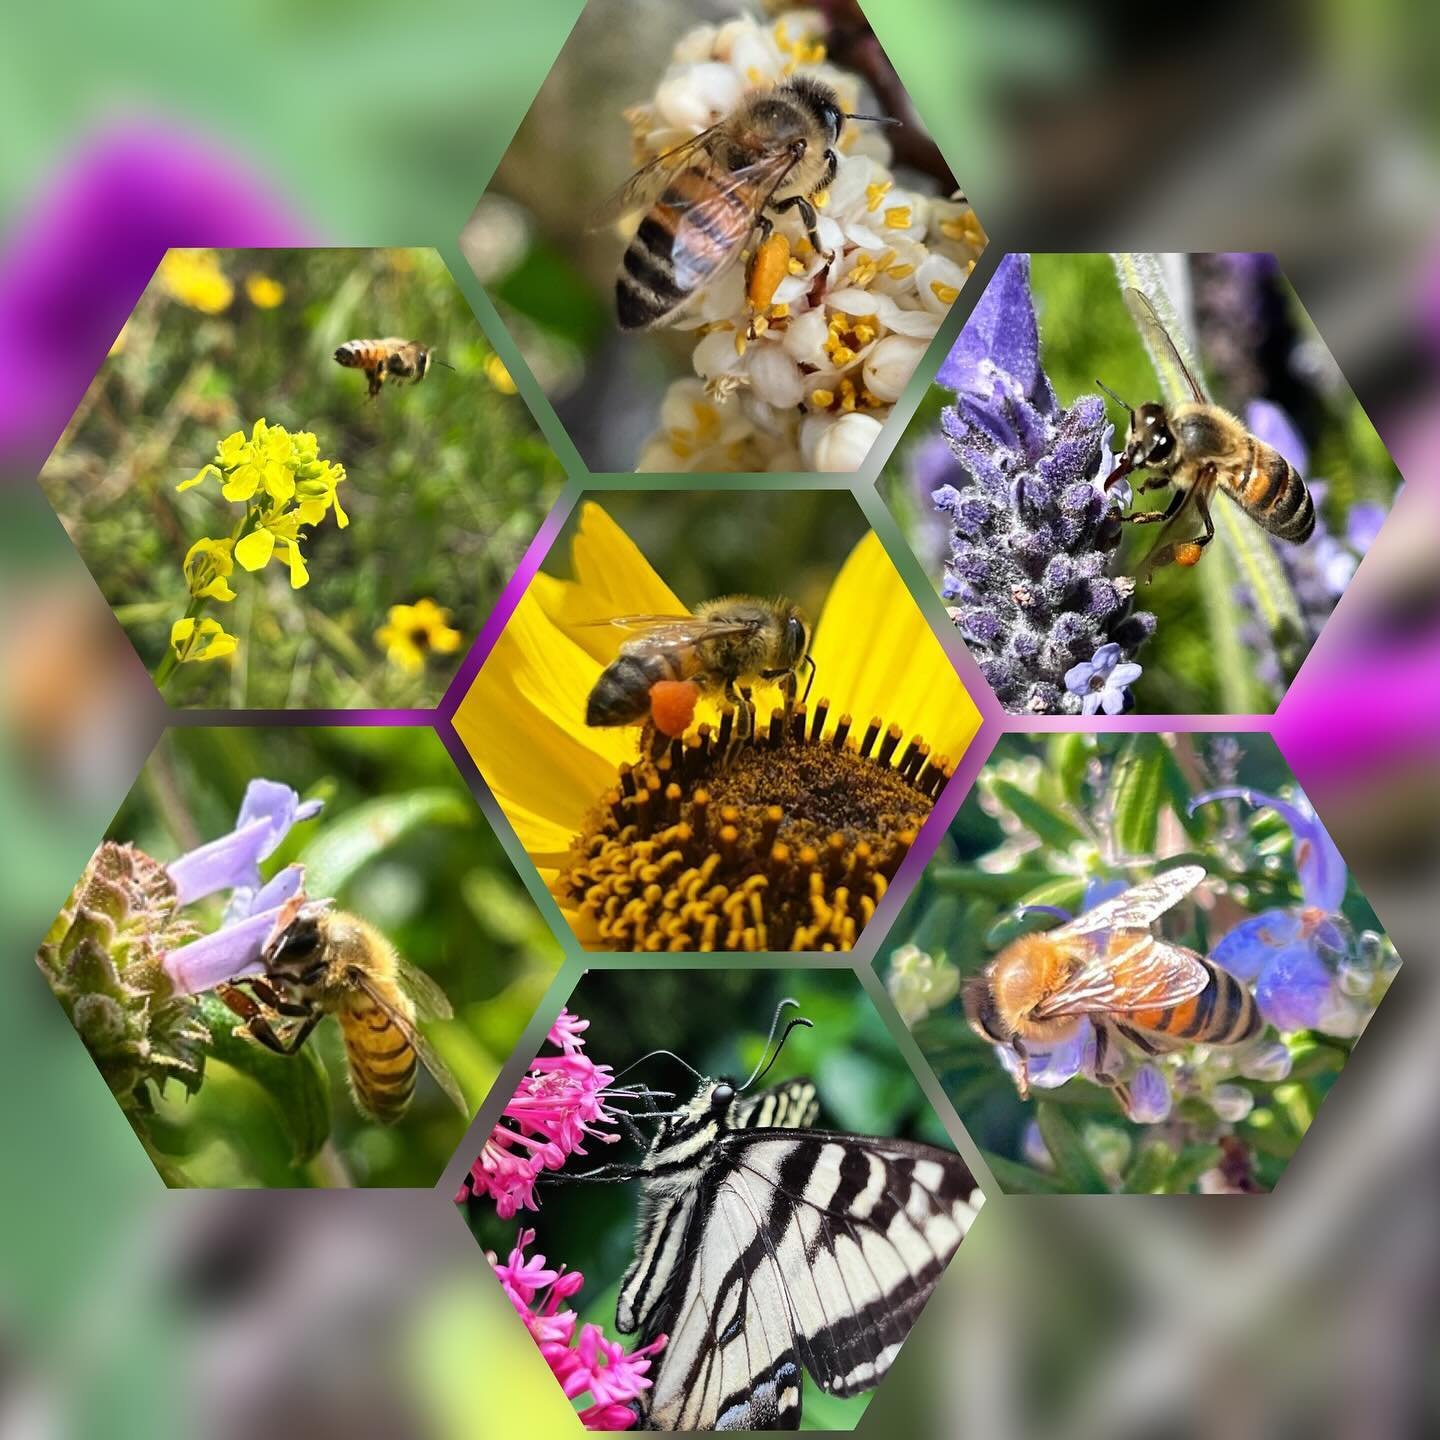 Flowers and Bees (and Butterflies, too), being in beautiful relationships together here in the Northern Hemisphere, in the Southern California Coastal Bioregion. These are some of the most wonderful sights to behold, seeing our fellow multispecies be